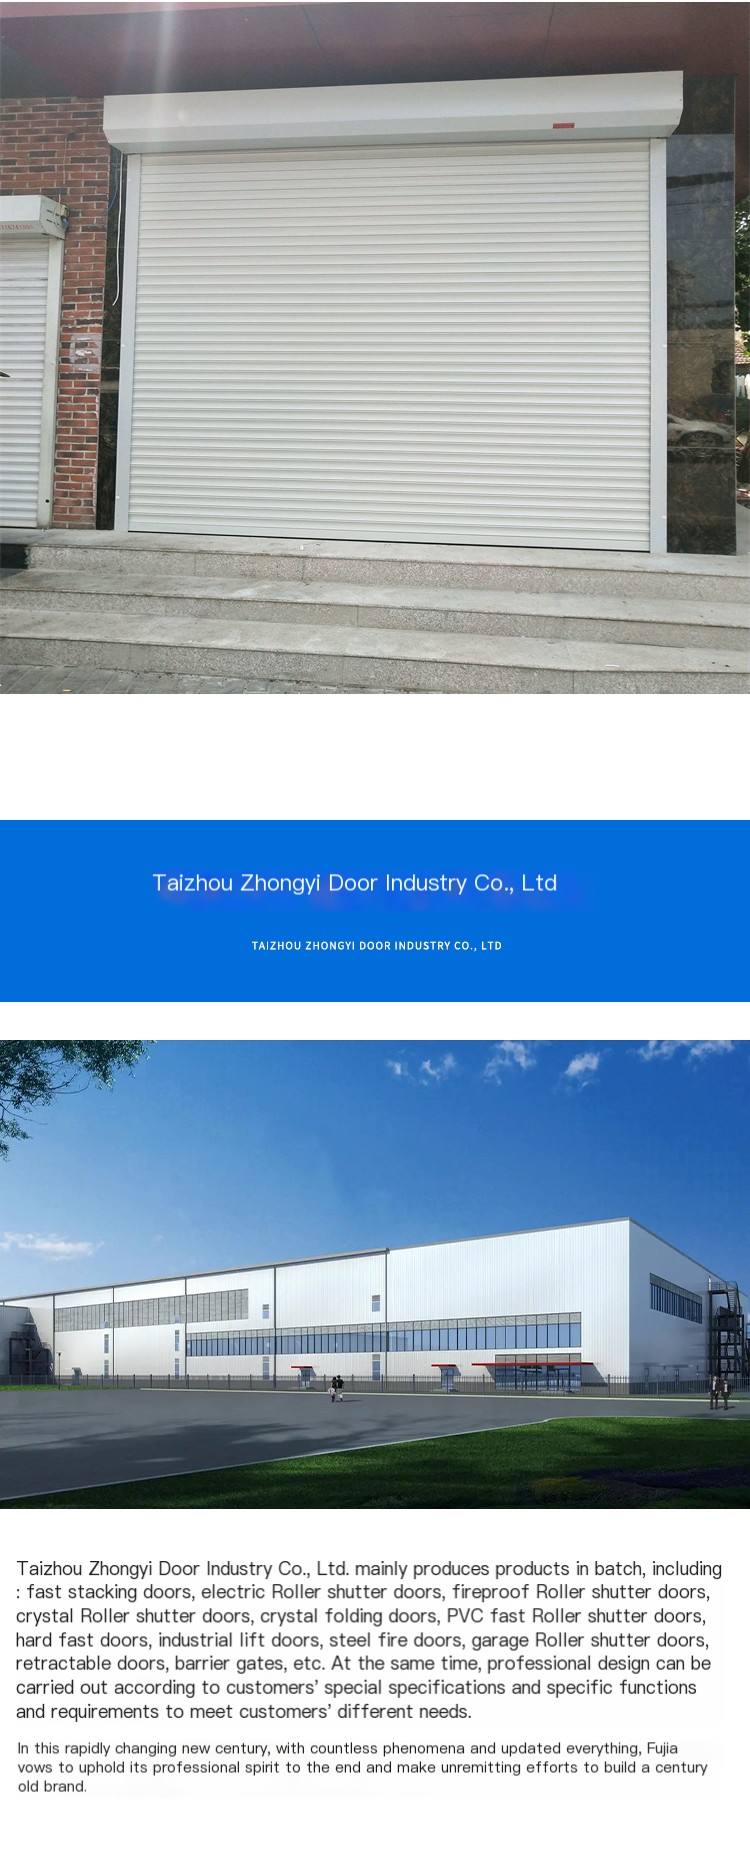 The installation of aluminum alloy roller gates in Zhongyi warehouse is convenient and can be customized according to needs with low noise